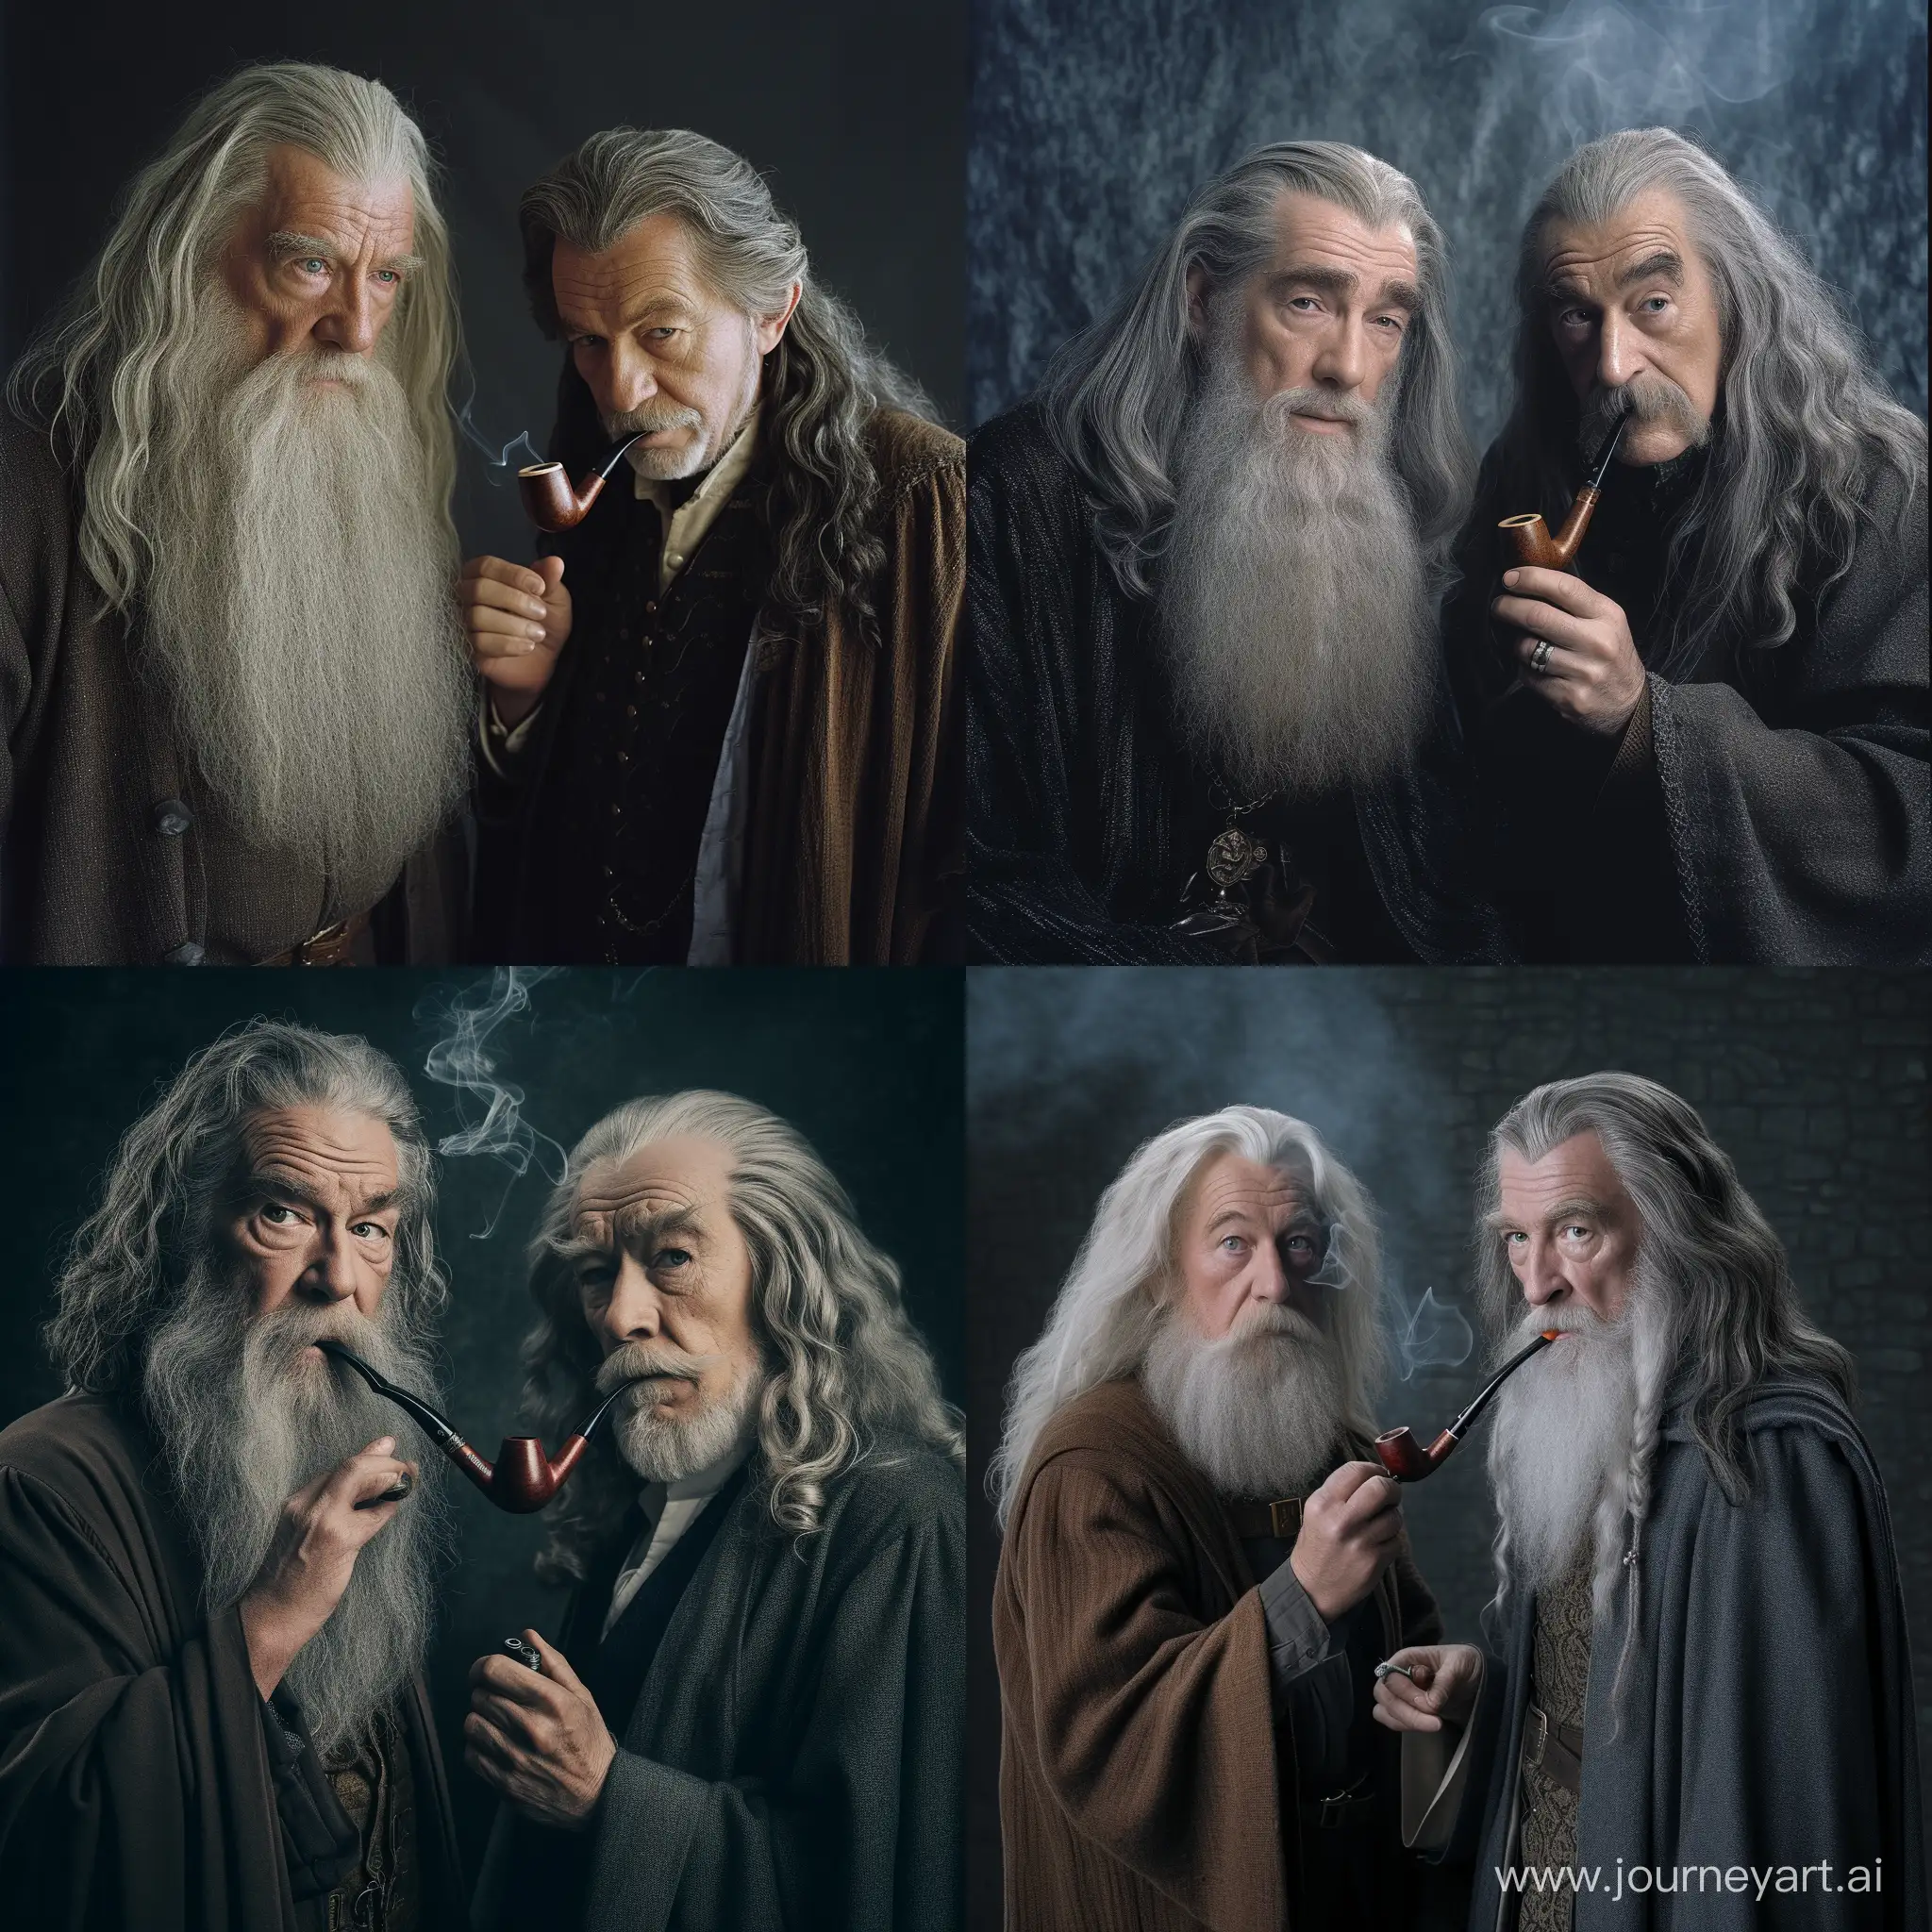 profesional photo of gandalf the gray with dumbeldore, smoking a pipe